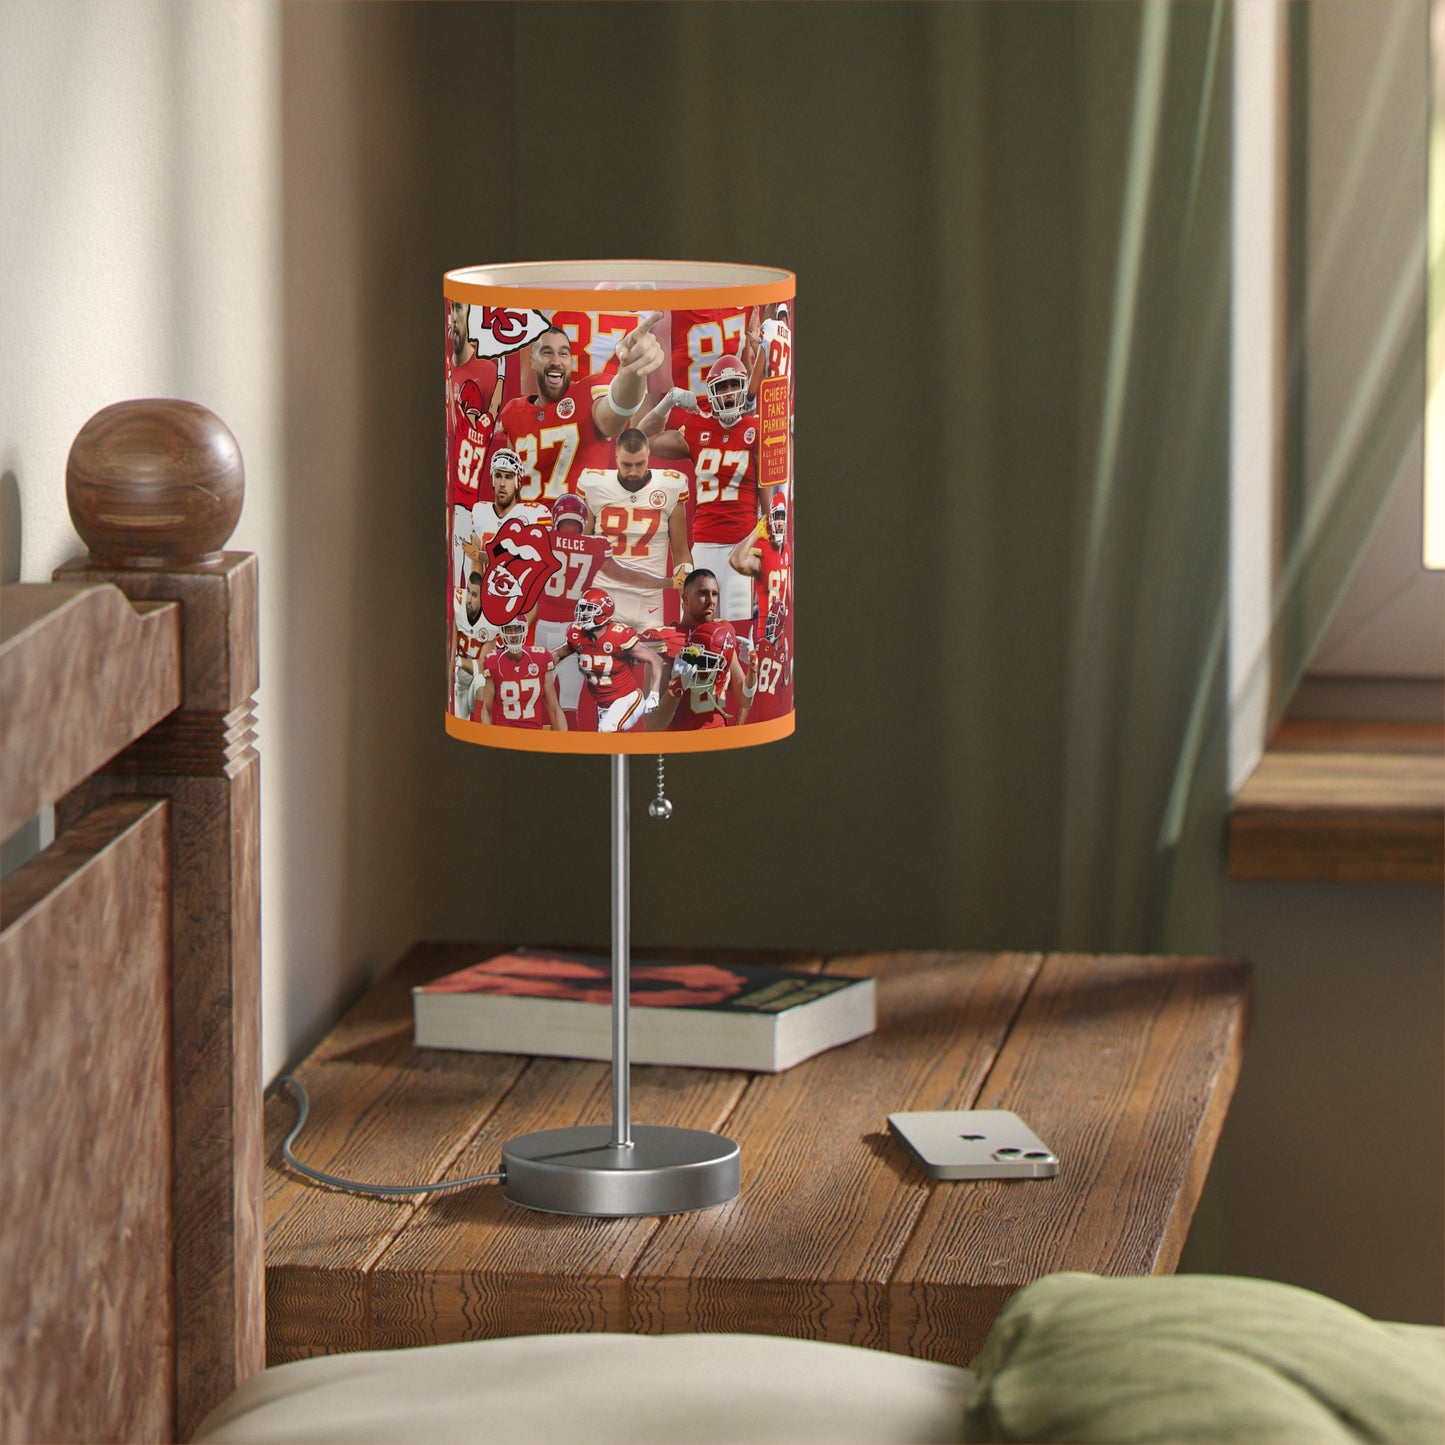 Travis Kelce Chiefs Red Collage Lamp on a Stand